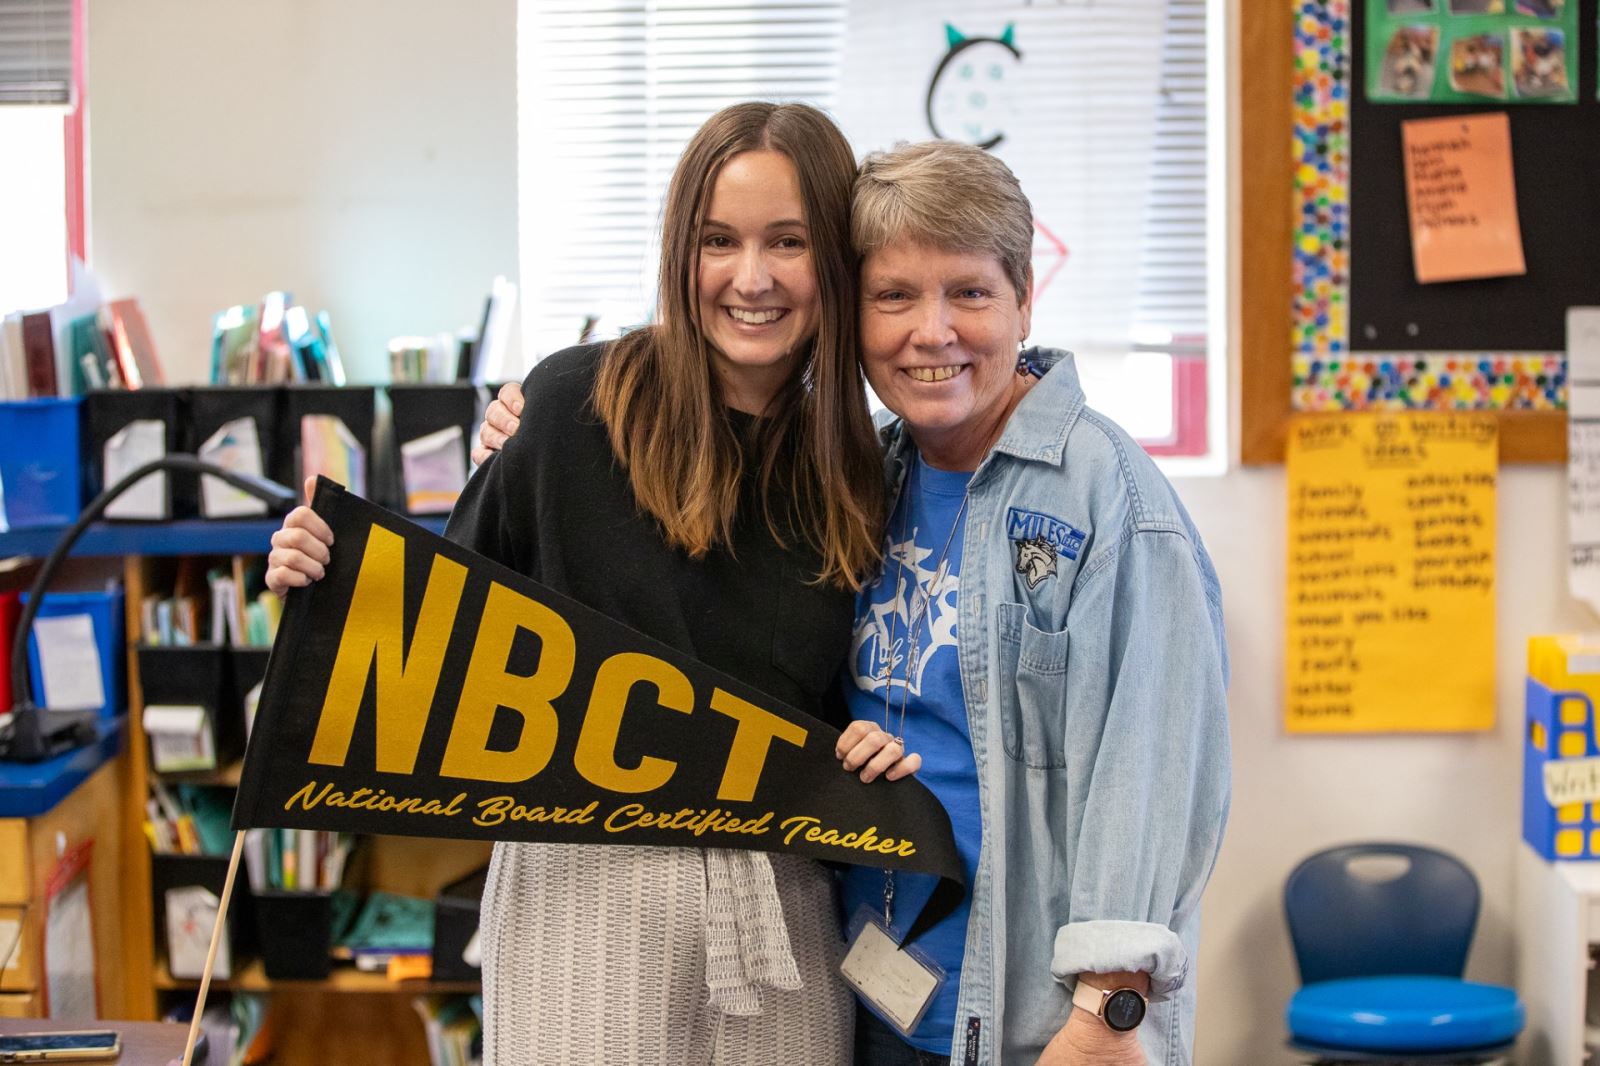 Erin Hines smiles next to her aunt, Patty, while holding an NBCT pennant.